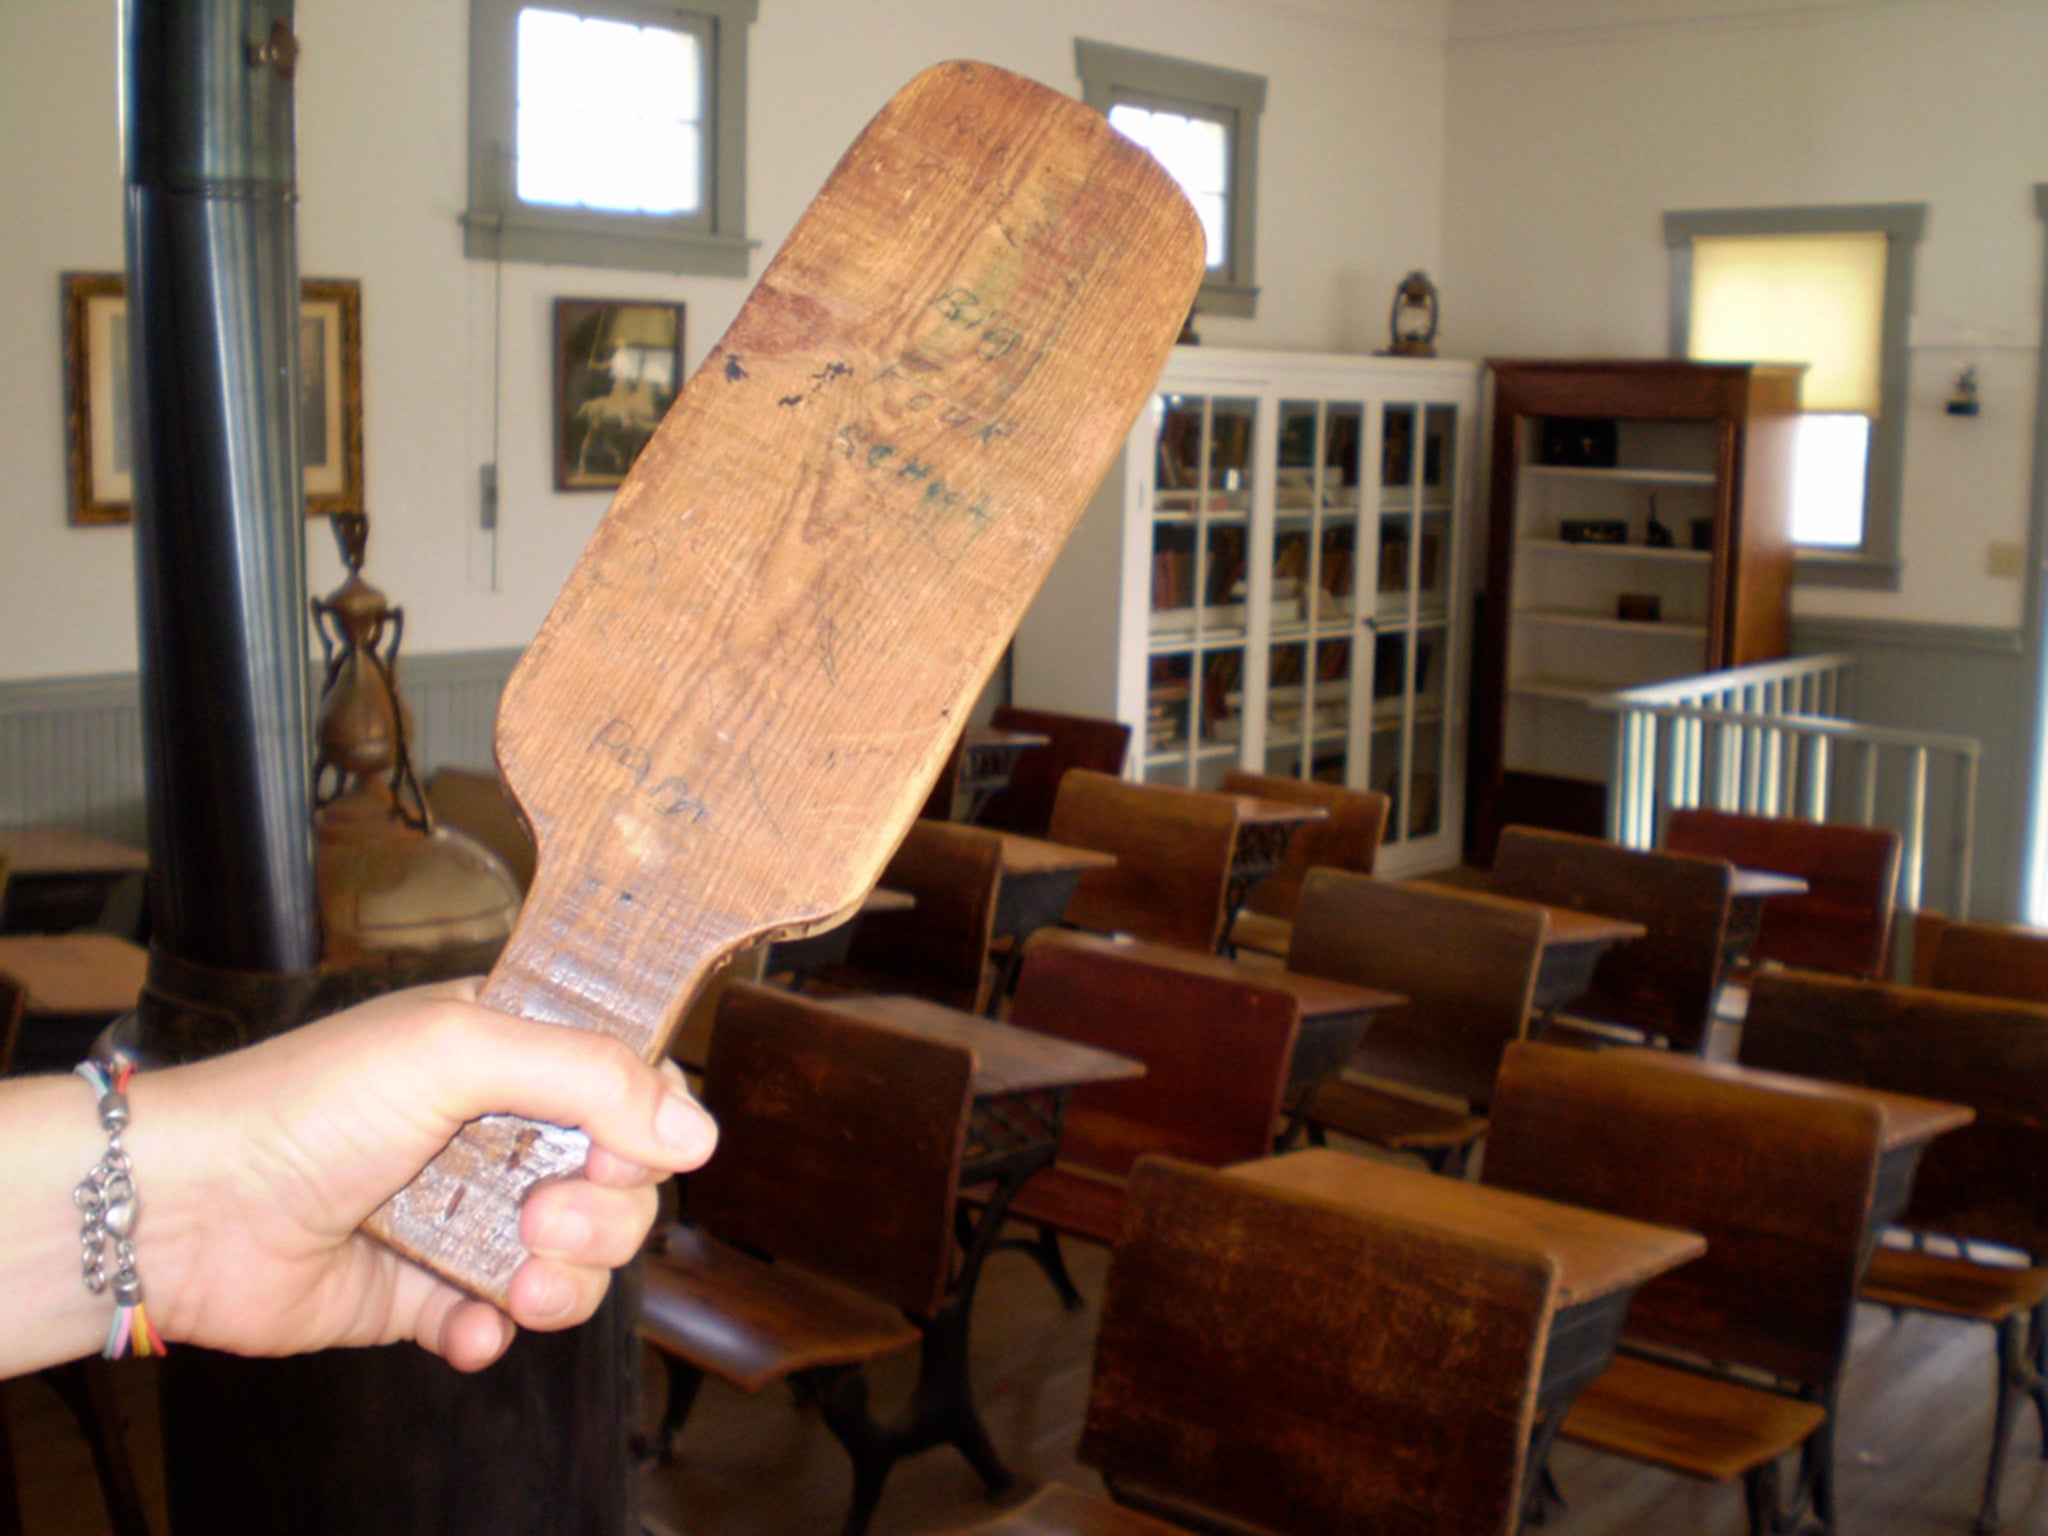 Texas Schools Bring Back Corporal Punishment For Bad Behaviour The Independent 